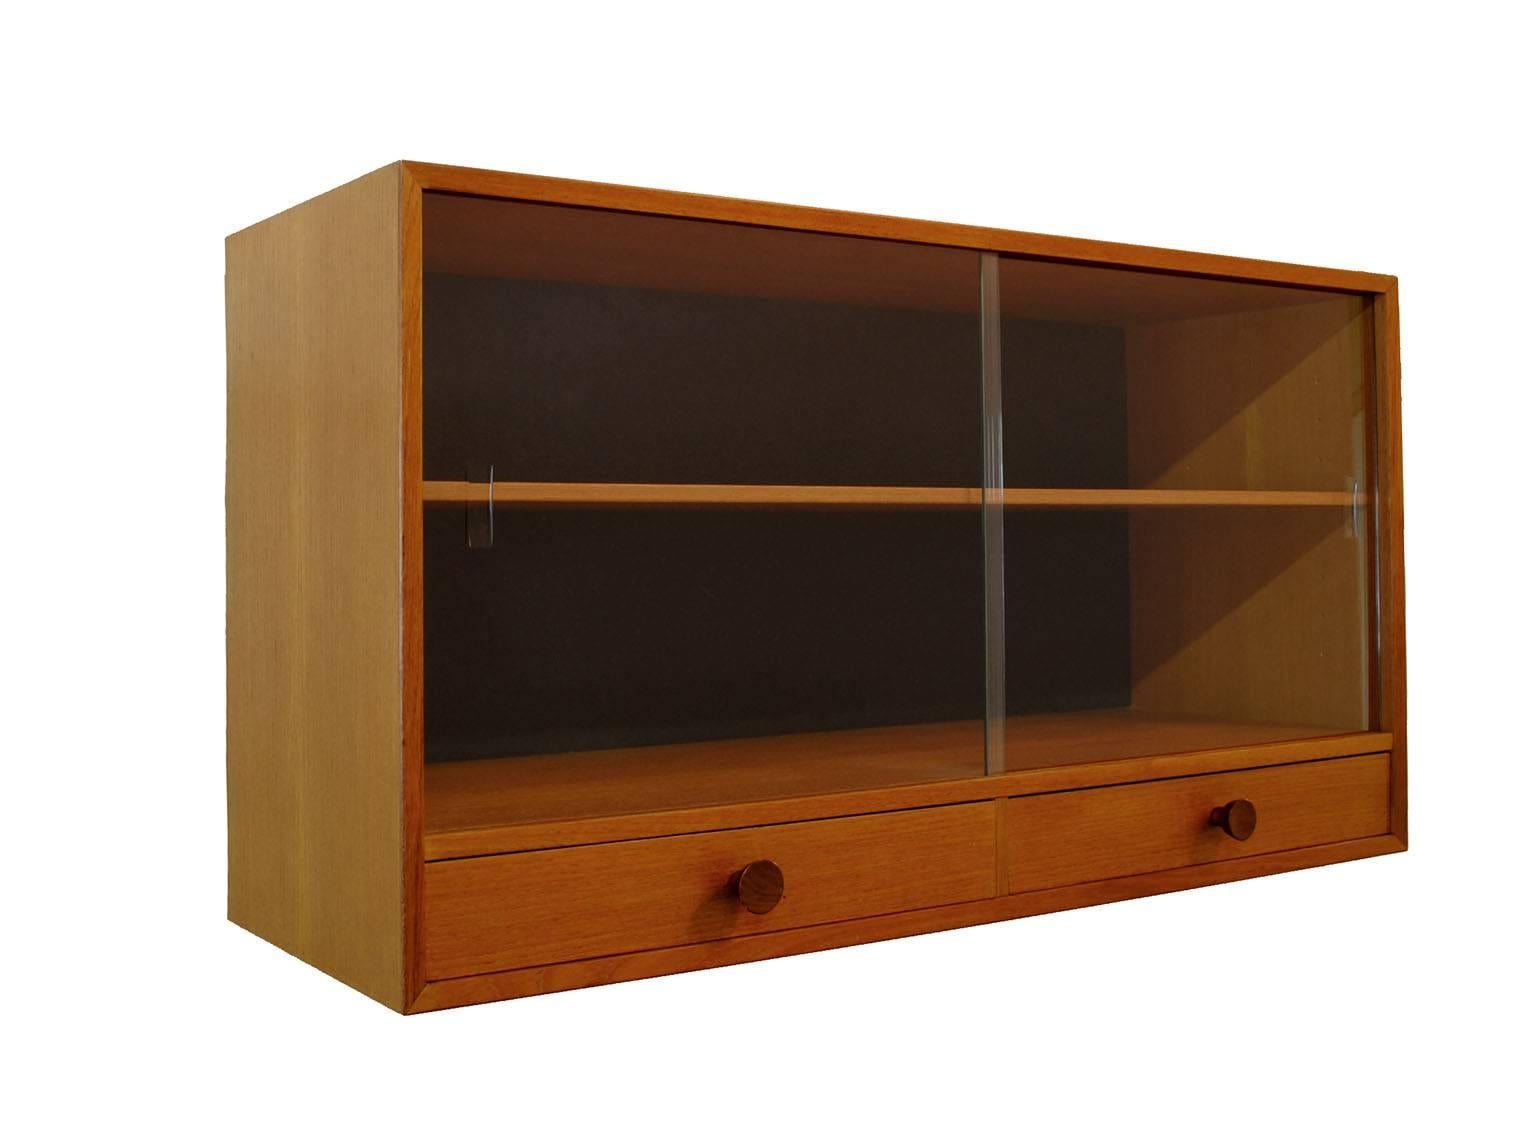 A stylish teak hutch from the 1960 Scandinavian modern era designed by Nils Jonsson for Troeds of Sweden. Well constructed featuring two lower drawers with dove-tailed joinery, glass sliding doors and an adjustable shelf. Can either sit freely on